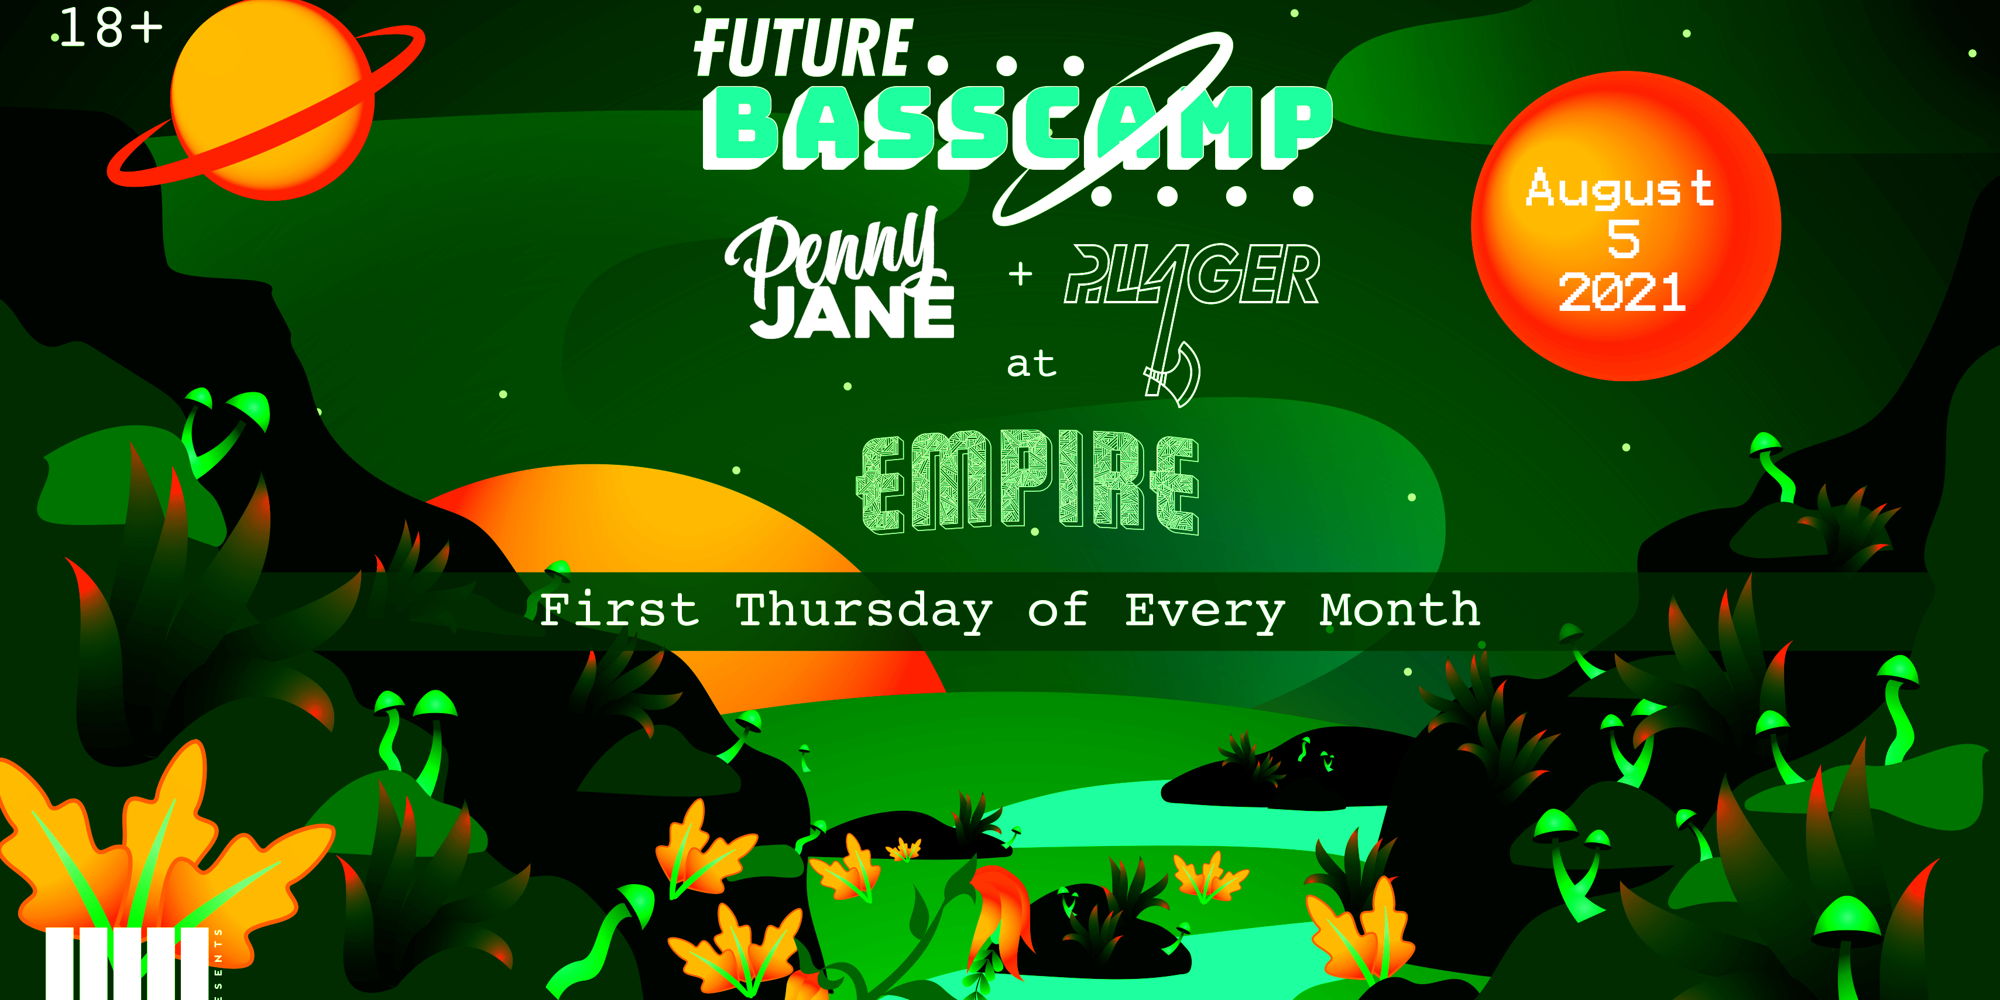 Future Bass Camp w/ Penny Jane + Pillager at Empire Garage 8/5 promotional image